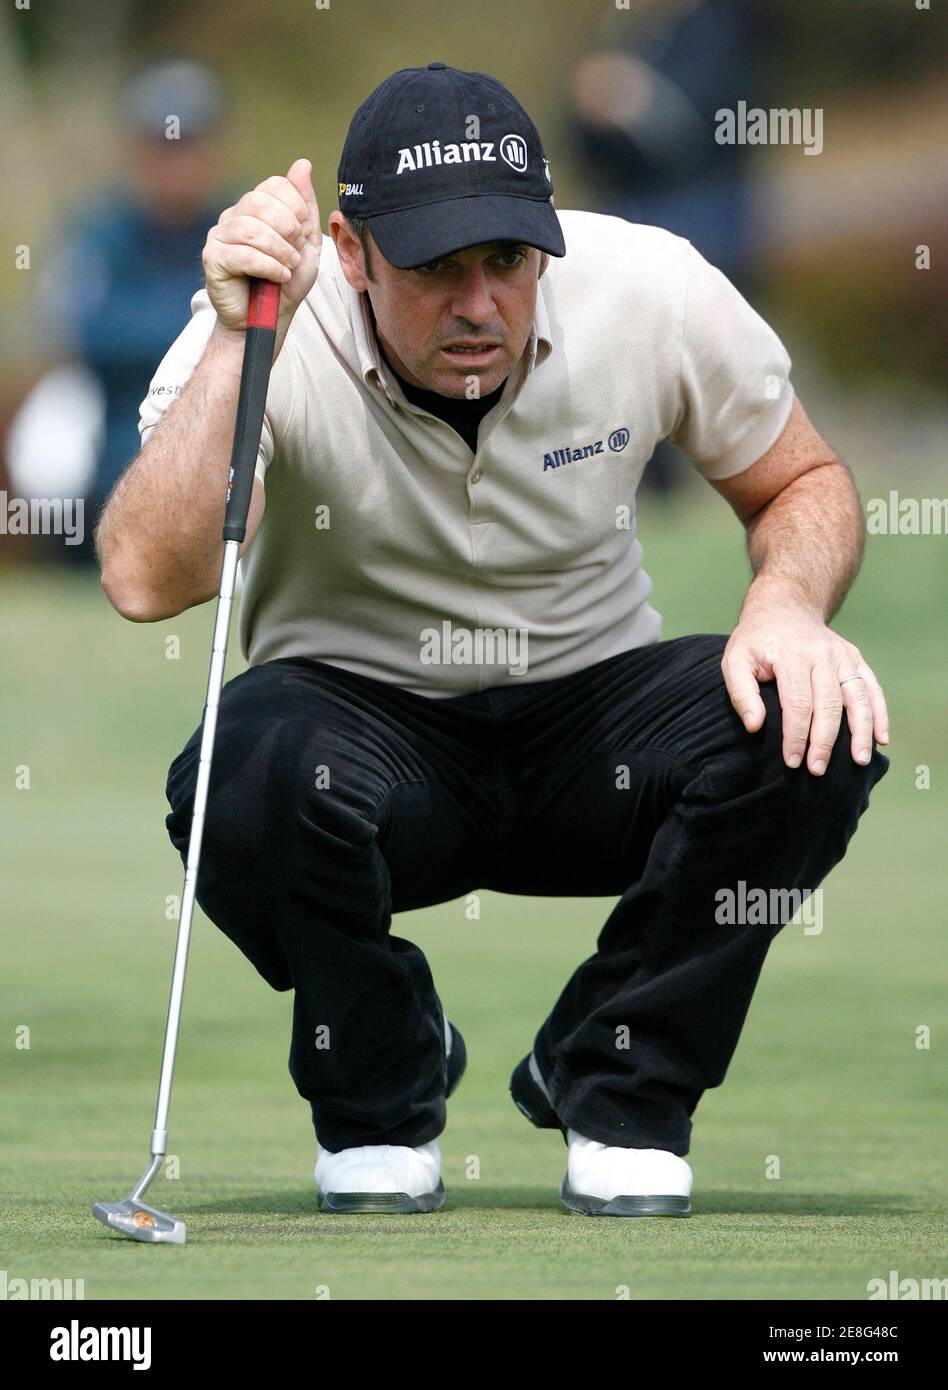 Paul McGinley of Ireland lines up a putt on the 6th green during the final round of the EPGA Ballantine's Championship golf tournament at the Pinx Golf Club in Seogwipo on Jeju Island March 16, 2008.  REUTERS/Jo Yong-Hak (SOUTH KOREA) Stock Photo